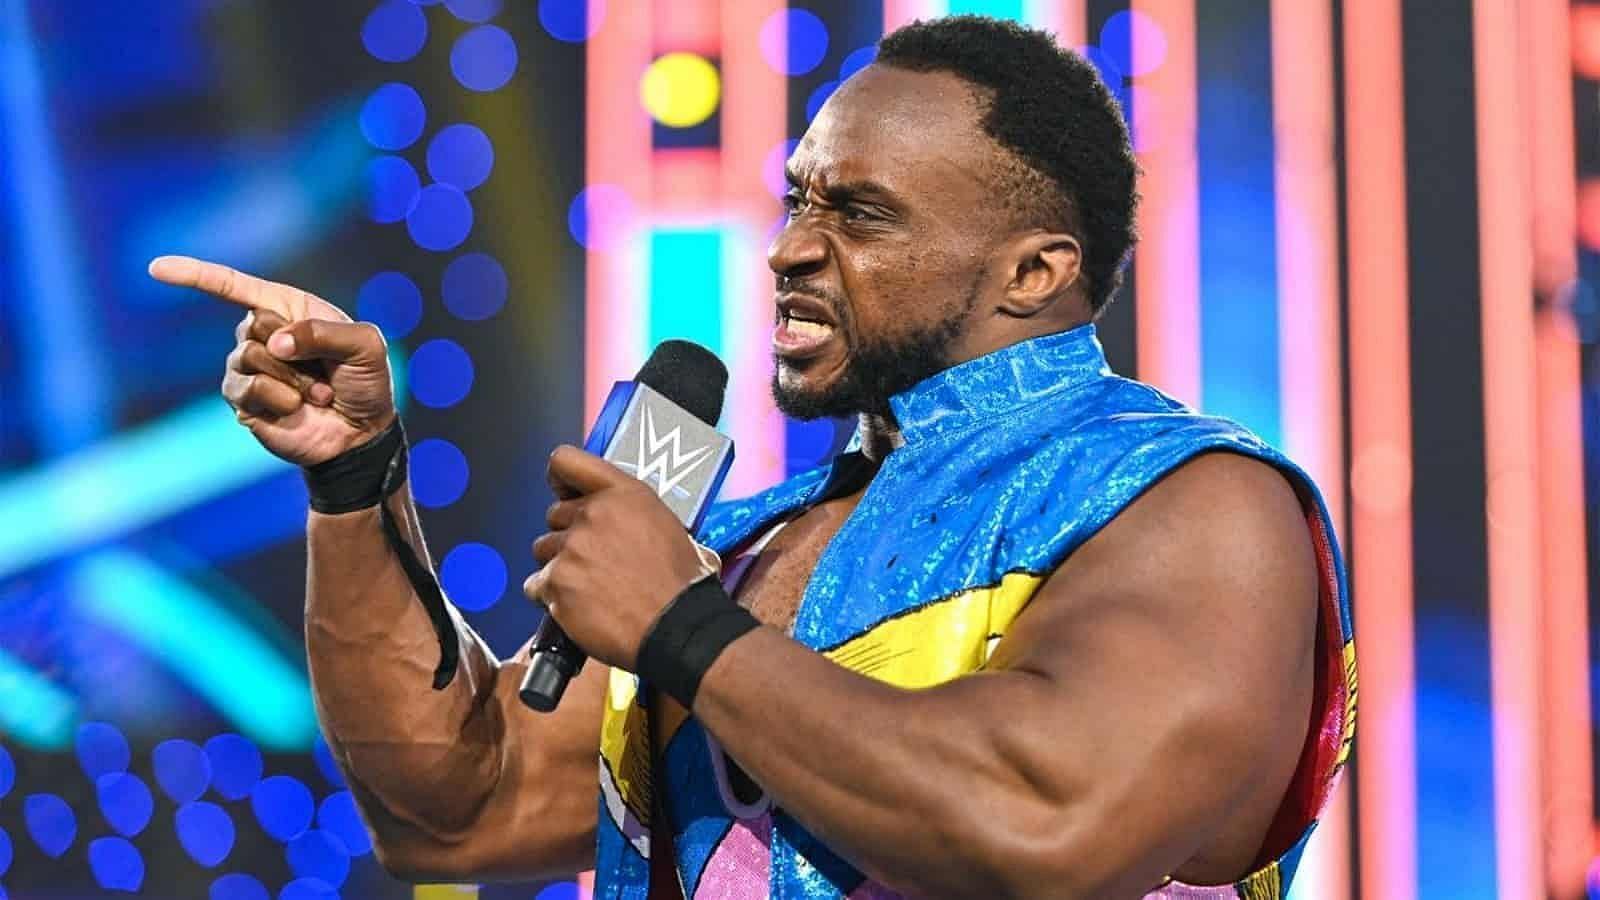 Big E has been absent from WWE for a full year